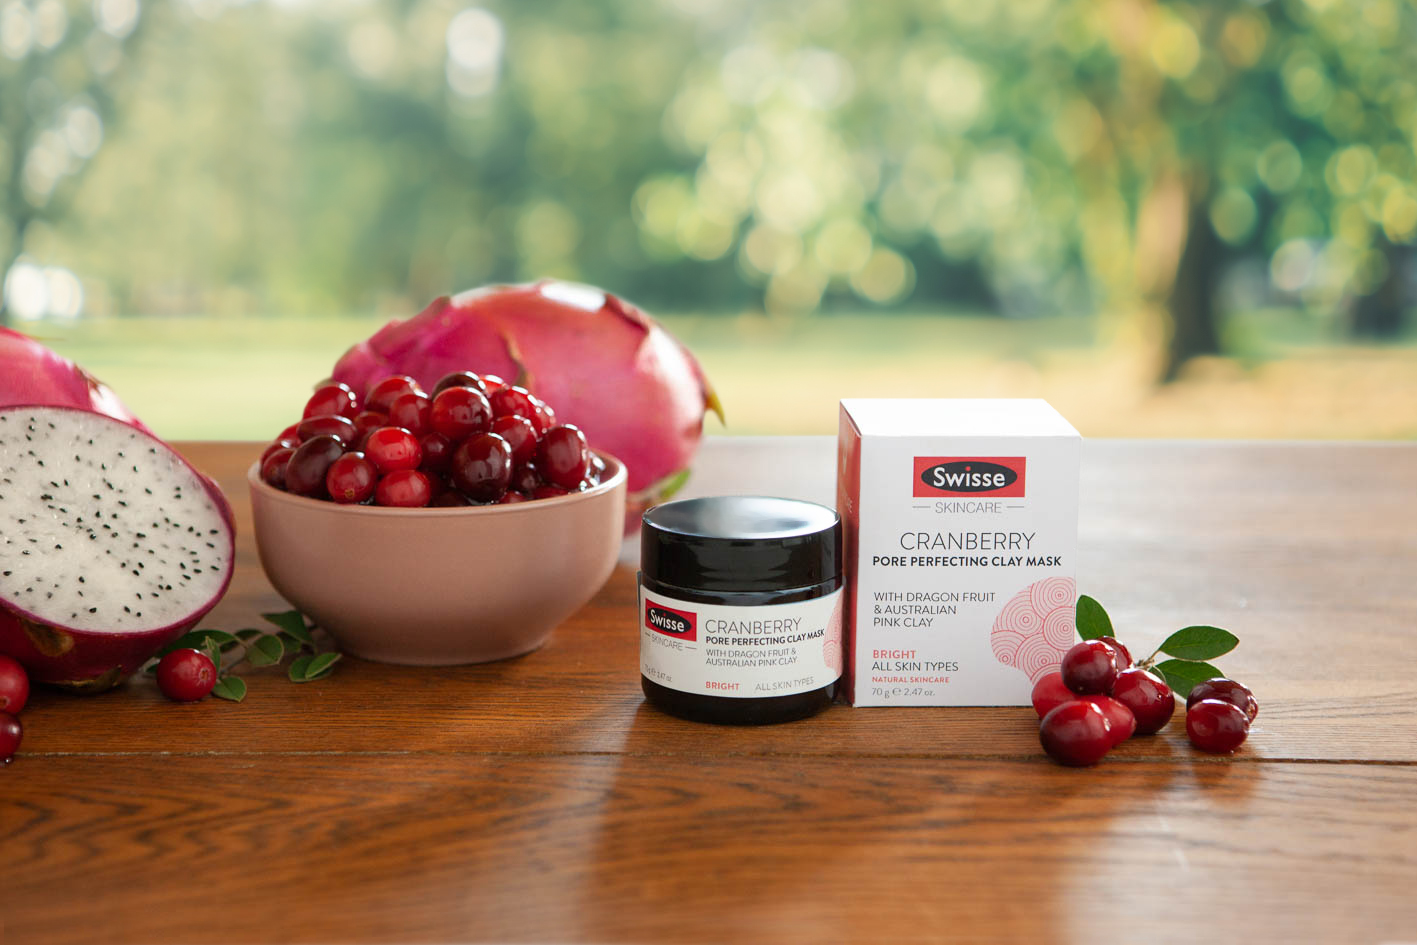 Swisse Cranberry Pore Perfecting Clay Mask